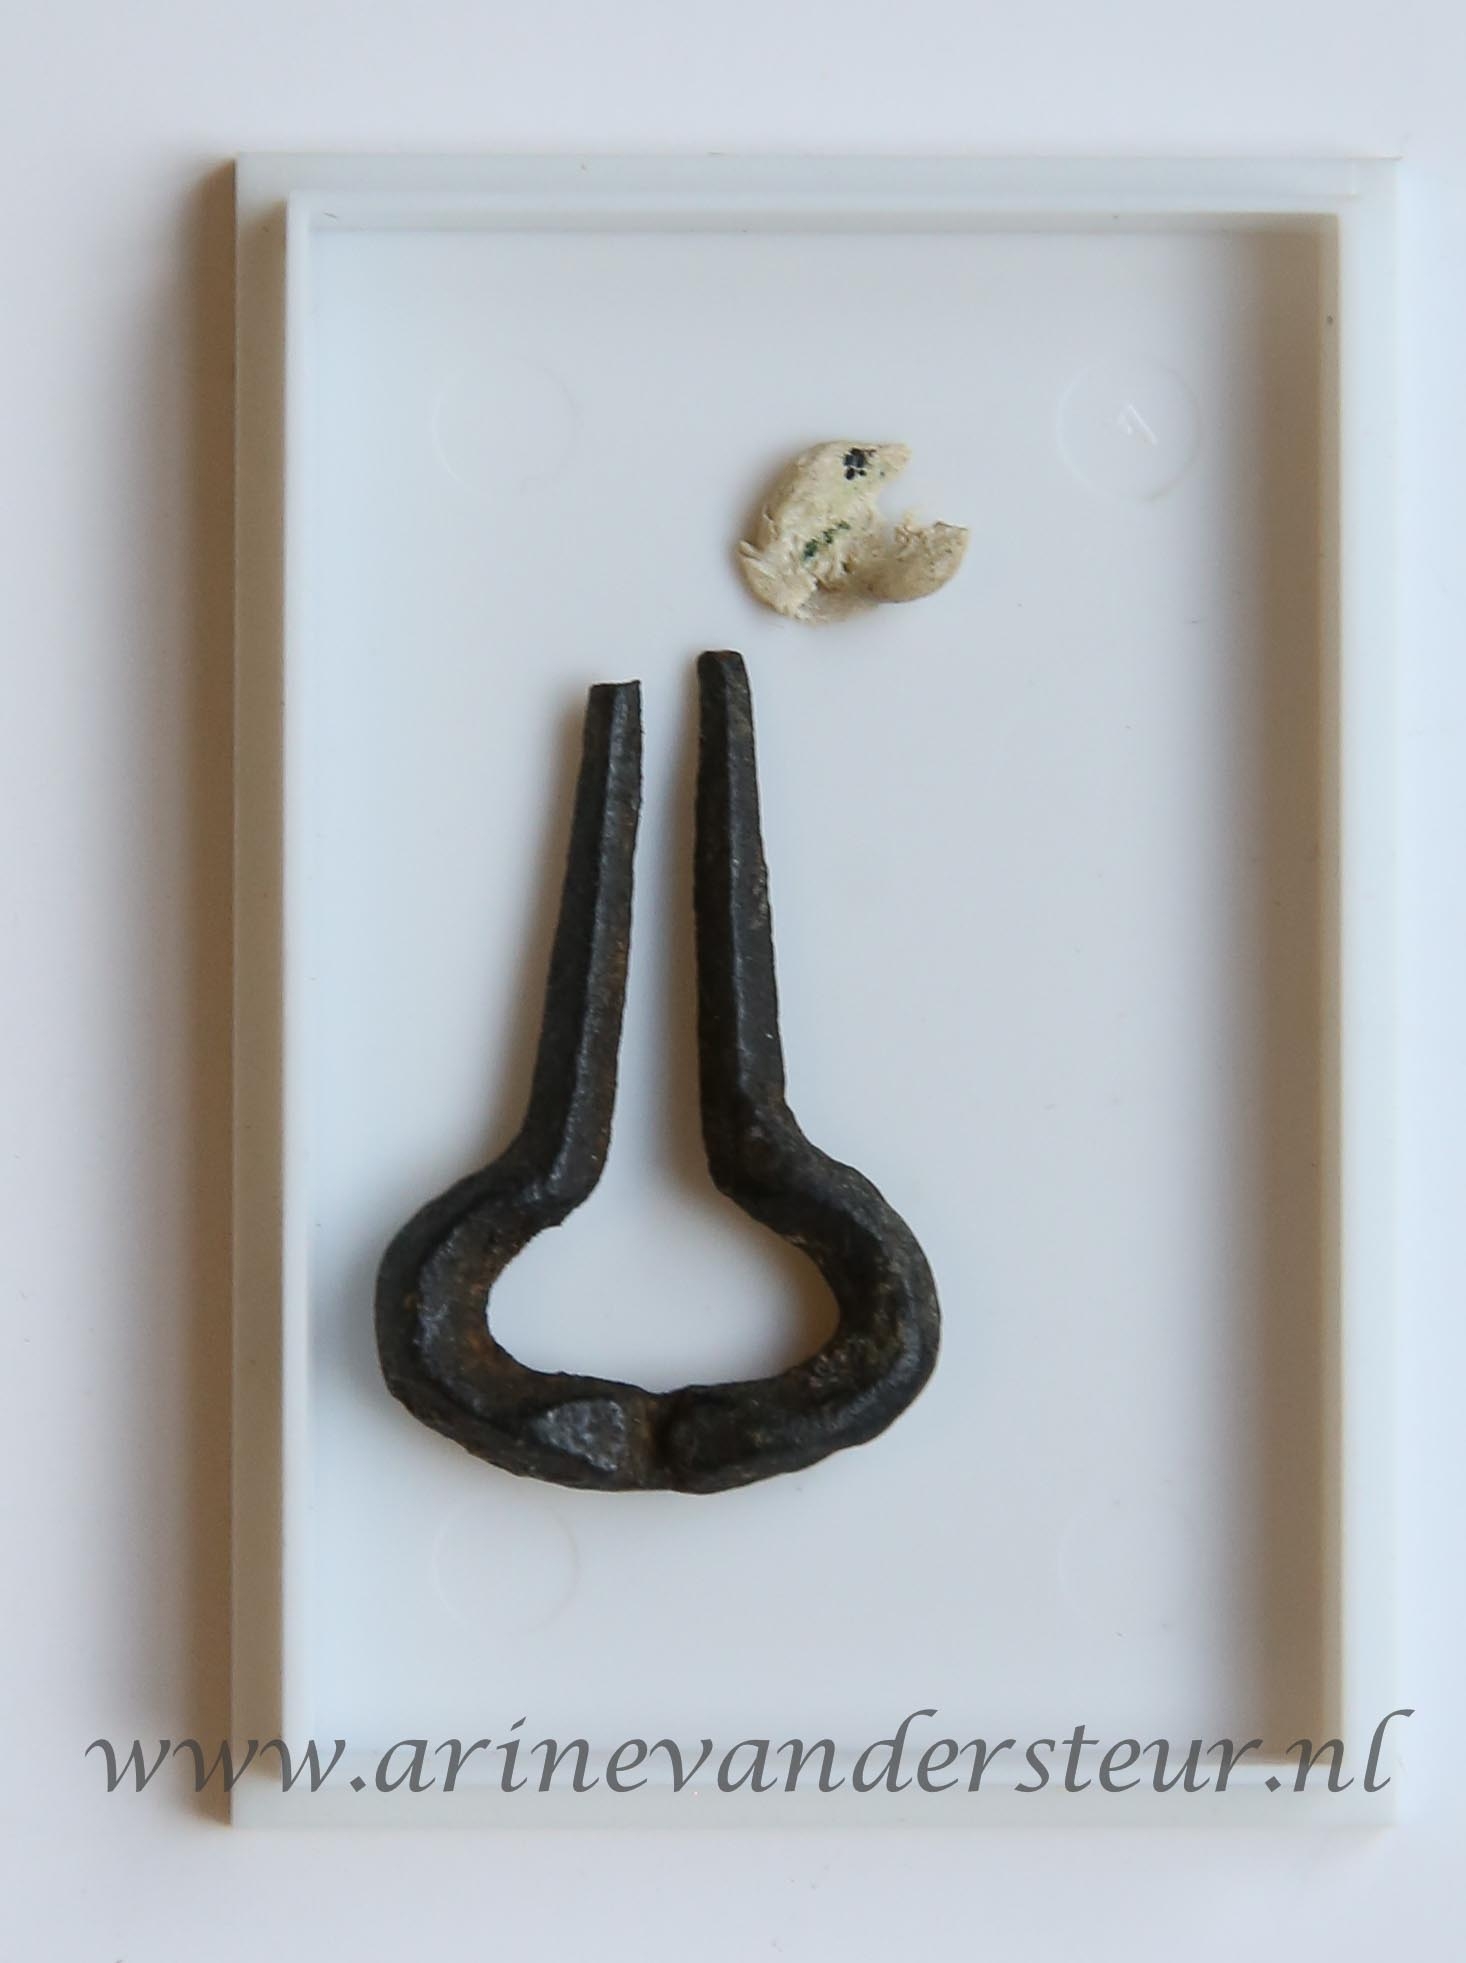 Mouth-Harp/ MONDHARPJE, ARCHEOLOGY/ARCHEOLOGIE Metal mouth harp from 17th century (?) found near an excavation in Amsterdam. Together with: `Notice sur l'art de fabriquer les guimbardes', 2 p. with engraving from the October 1806 edition of the Bulletin de la Société d'encouragement pour l'industrie nationale.